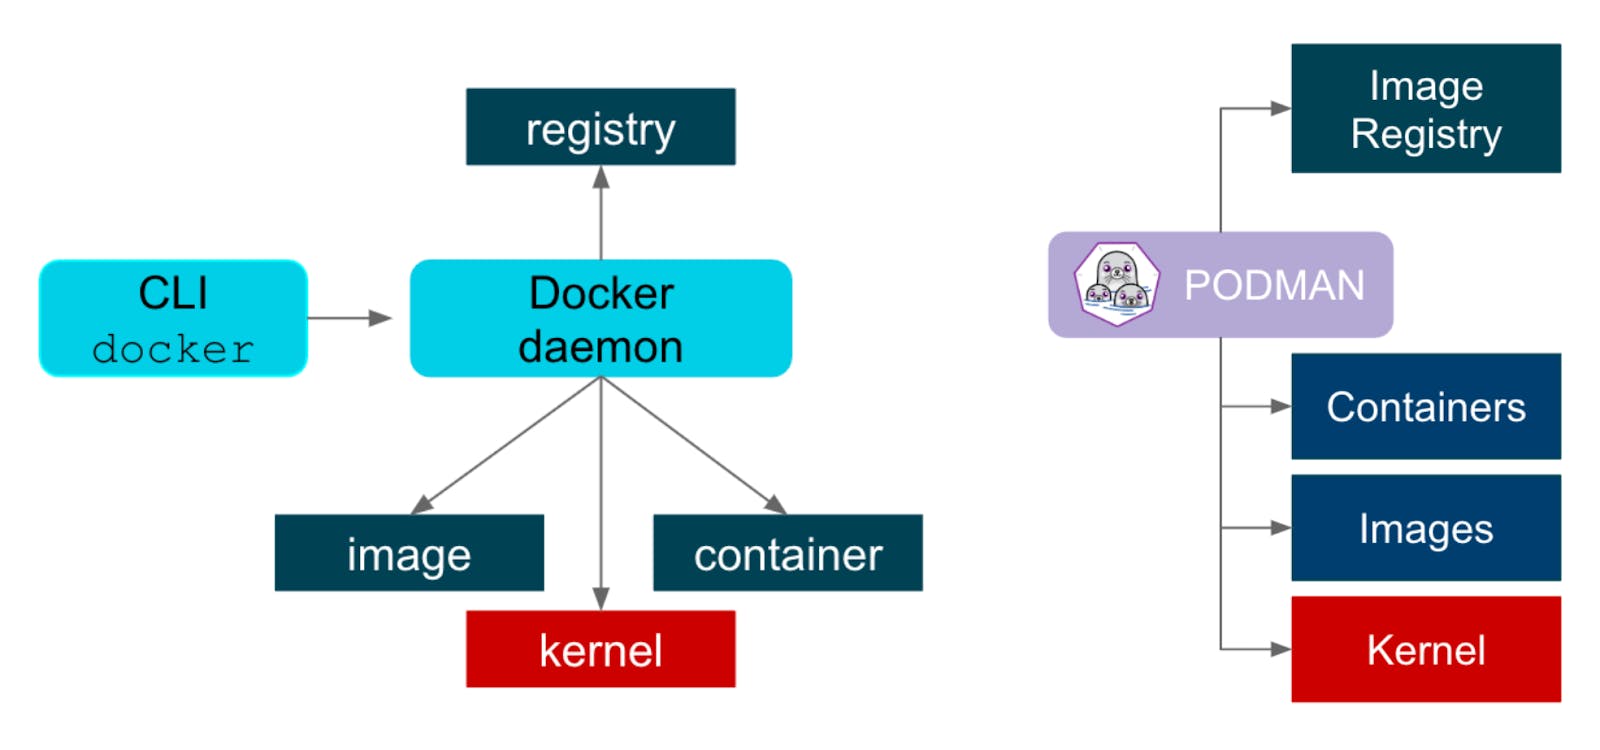 Differences between the architecture of Docker and Podman